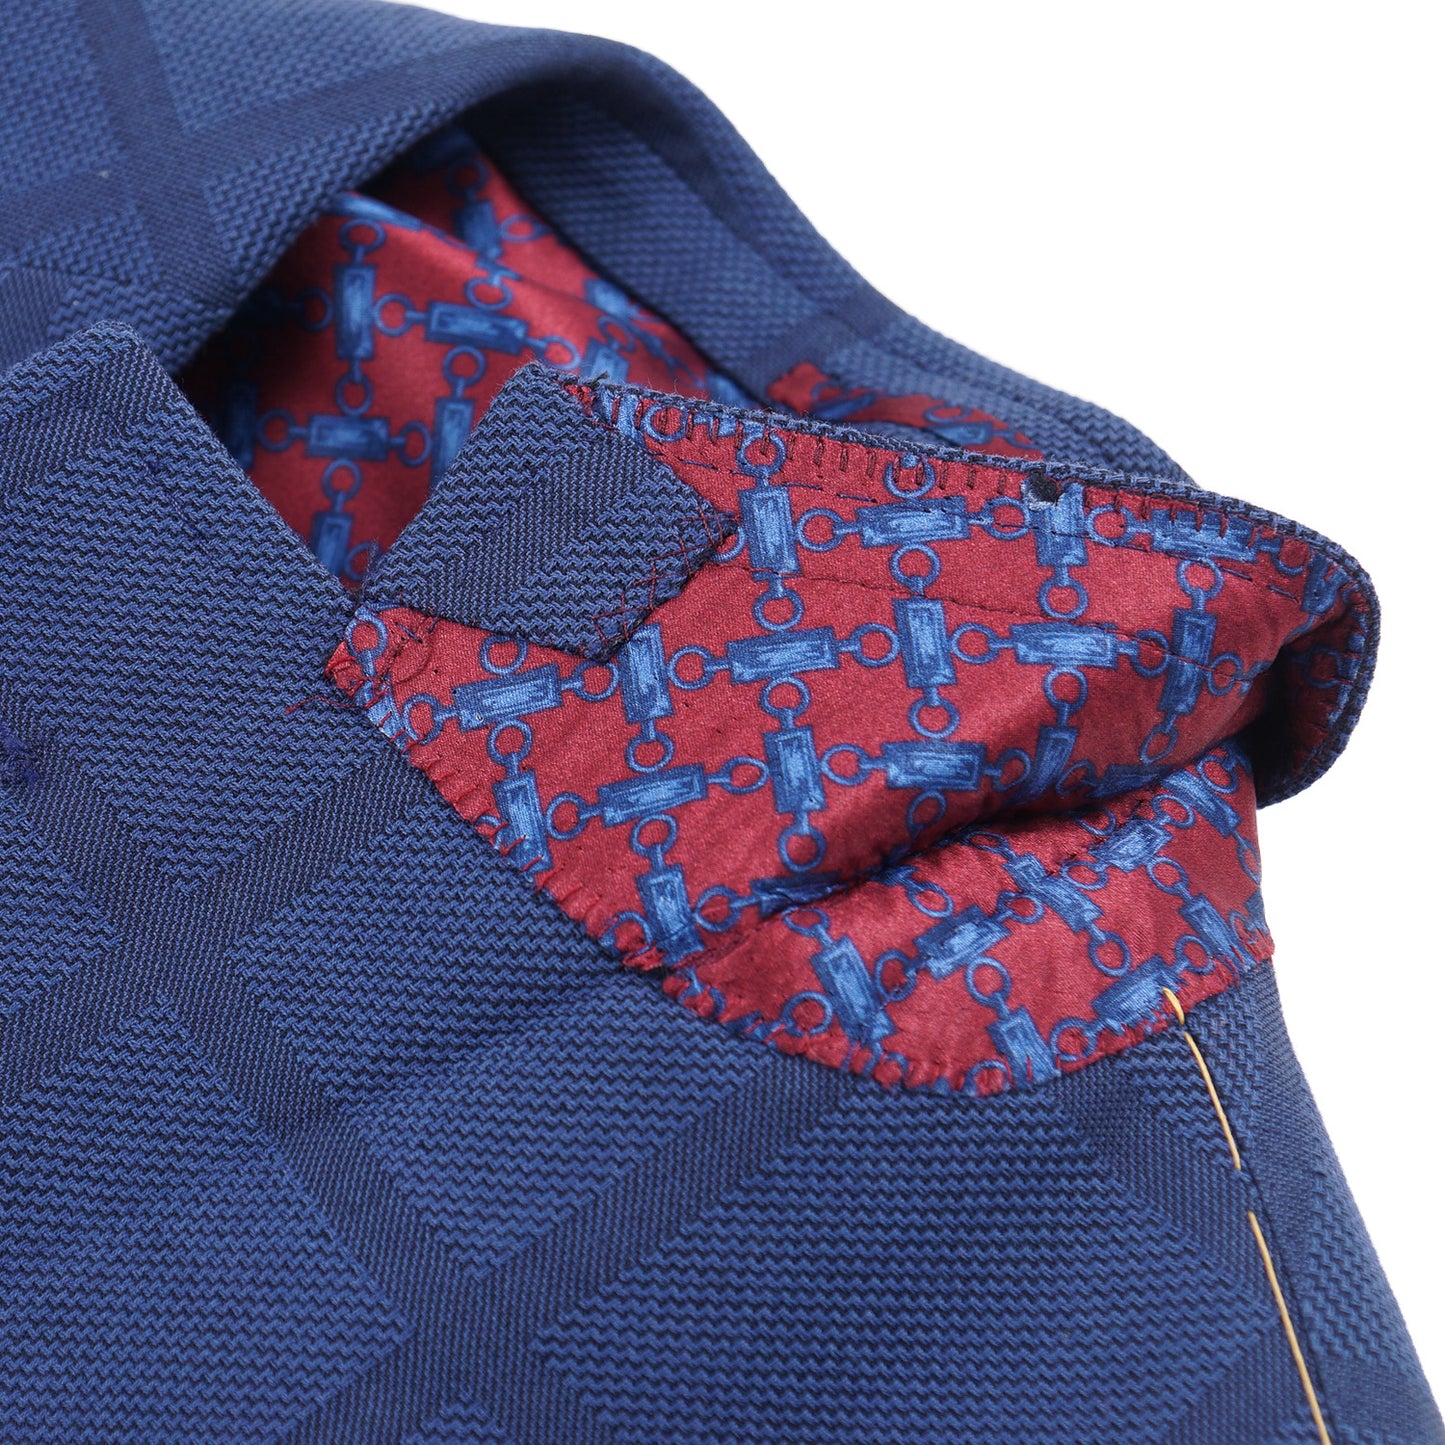 Zilli Slim-Fit Woven Wool and Cotton Sport Coat - Top Shelf Apparel